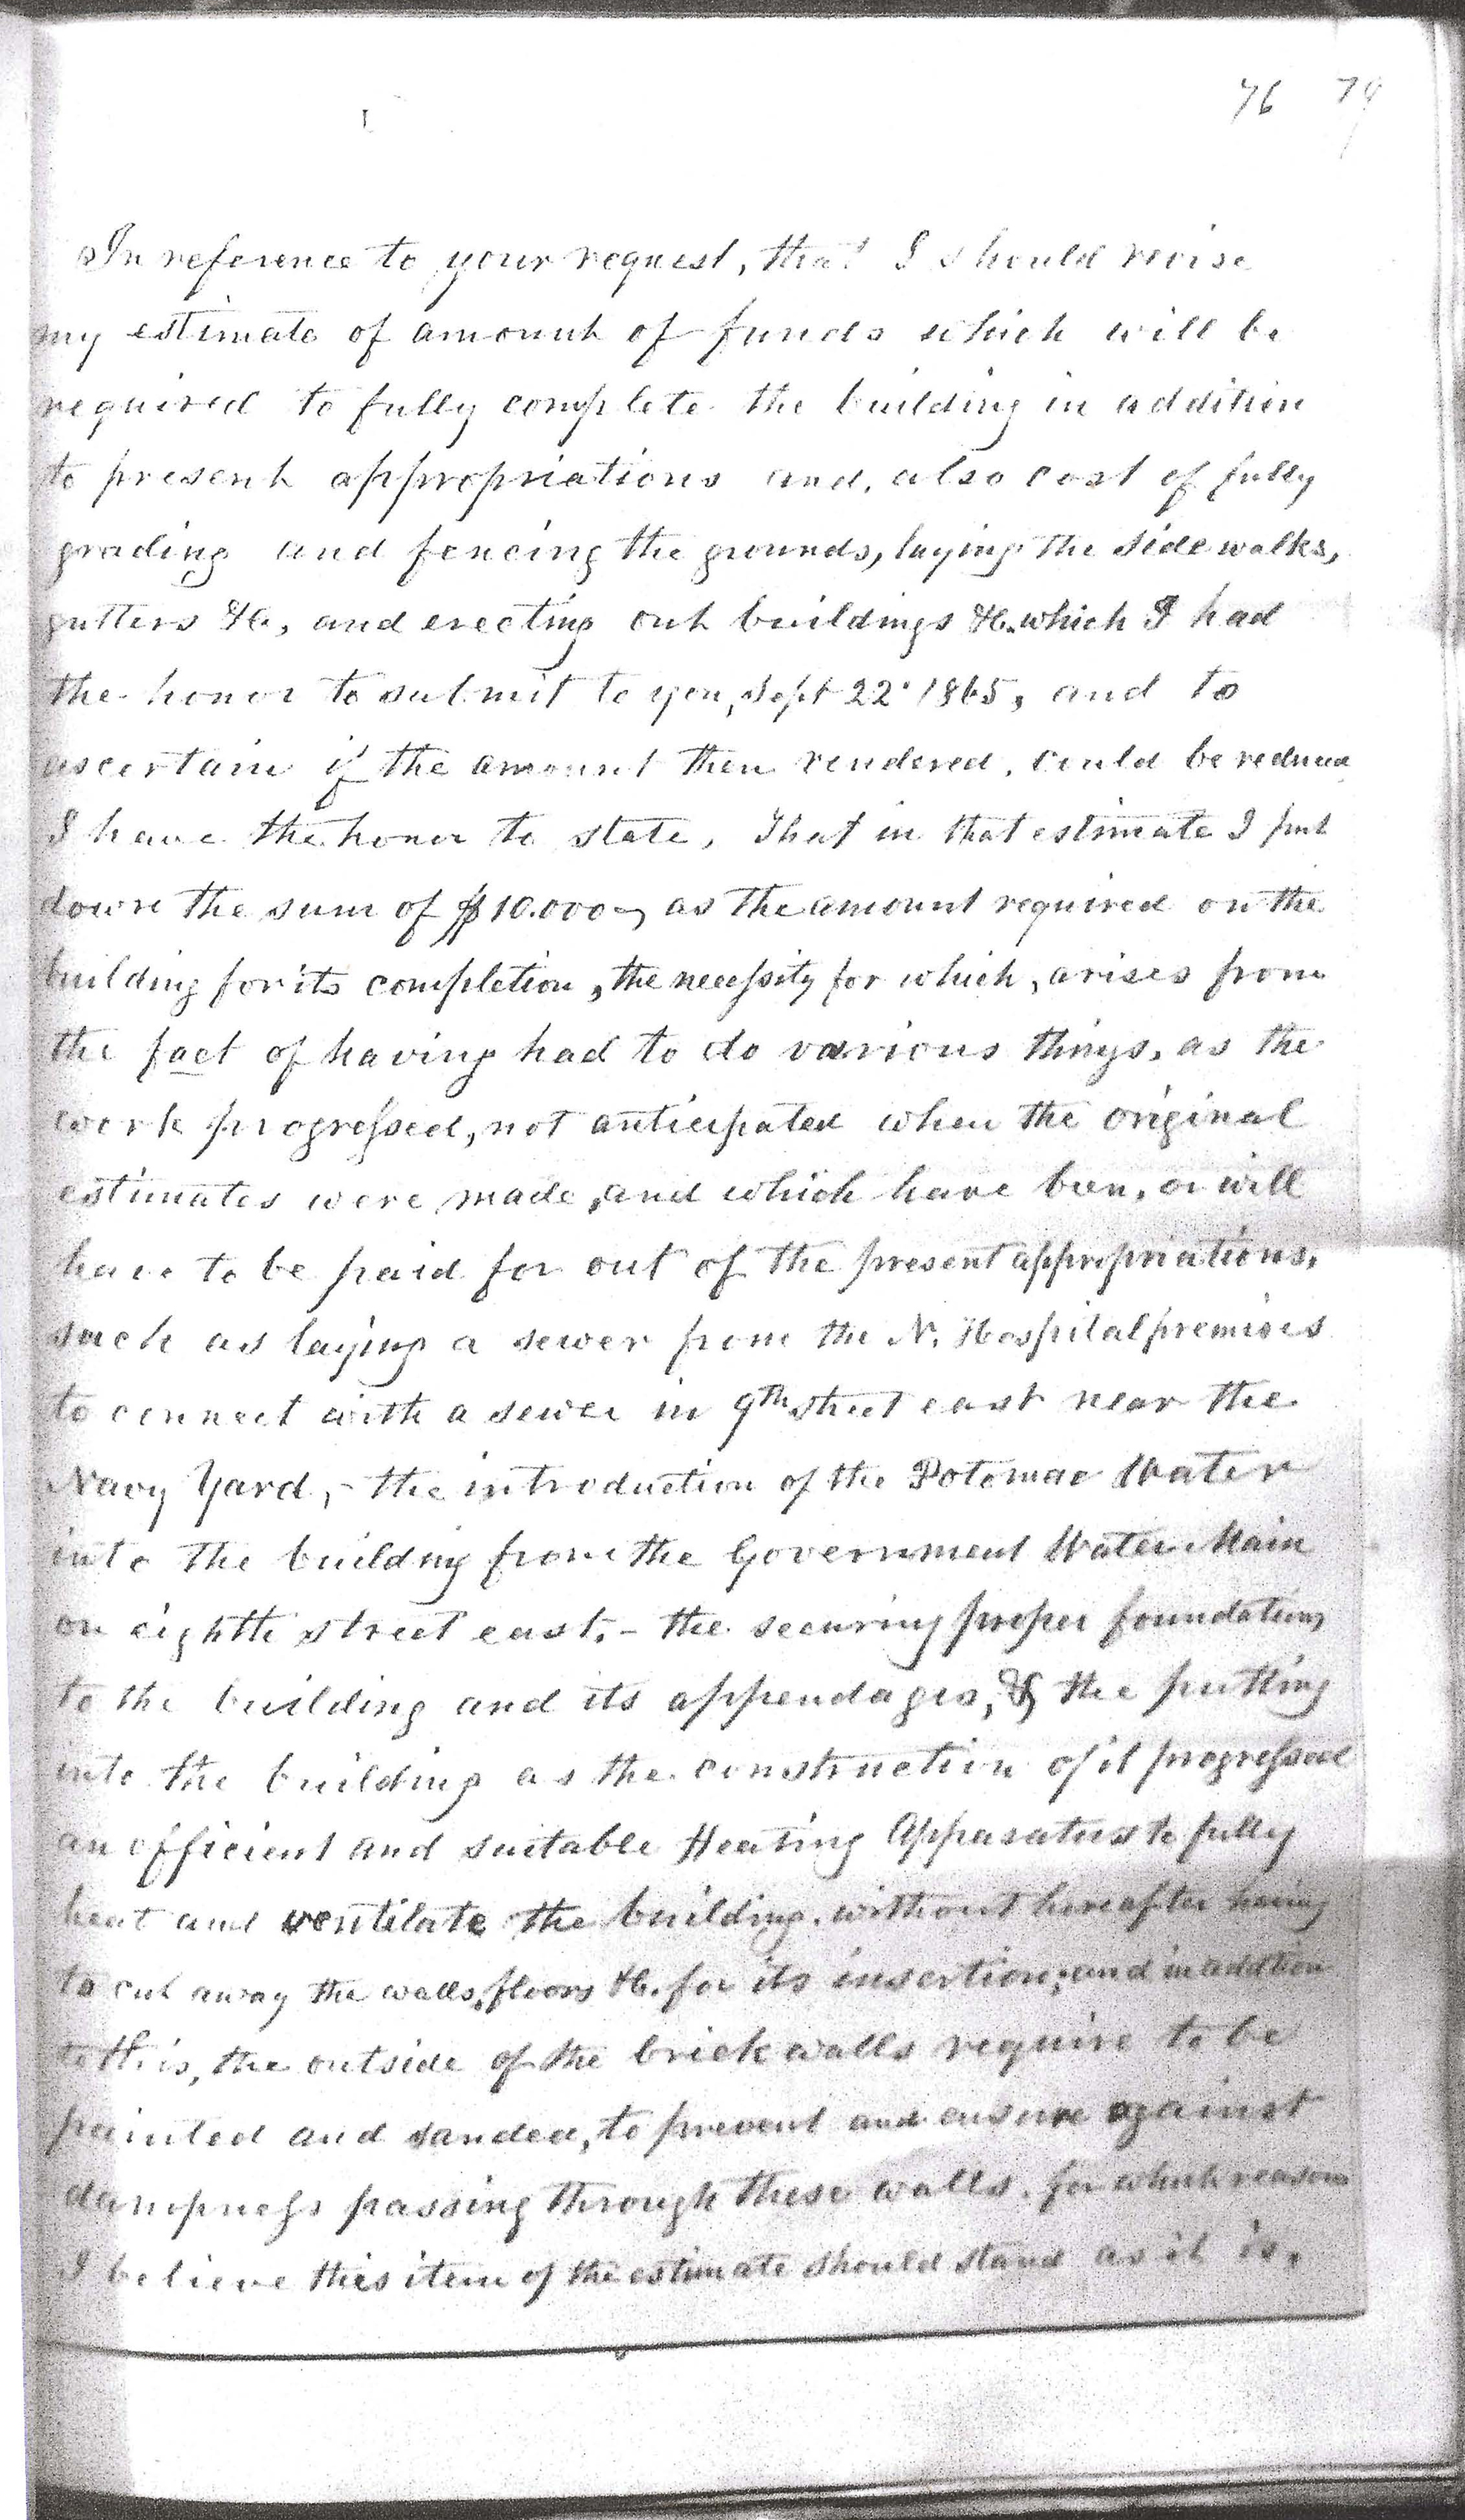 Monthly Report of the Superintendent of Construction, October 2, 1865, Page 2 of 4